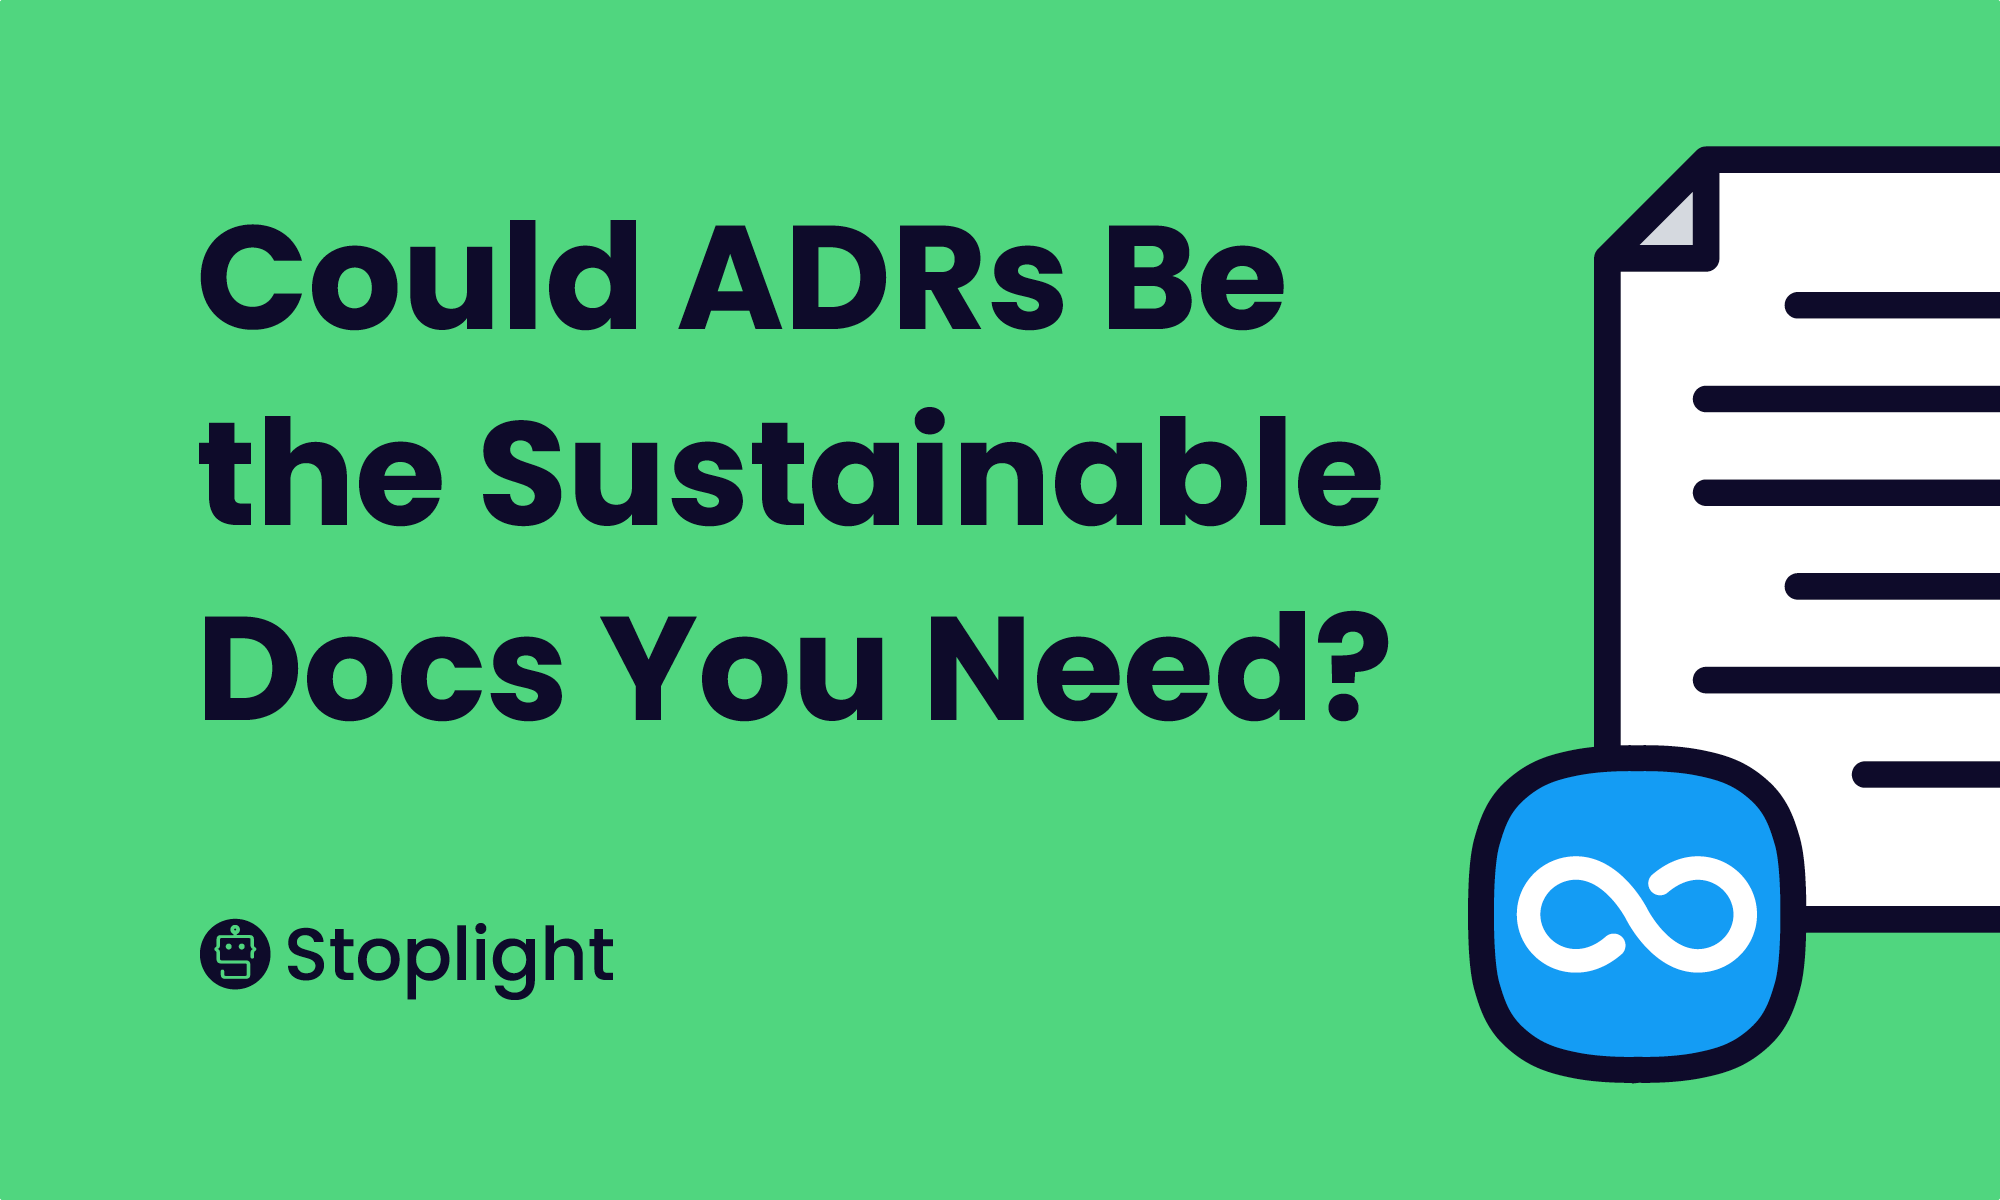 Could ADRs Be the Sustainable Docs You Need?